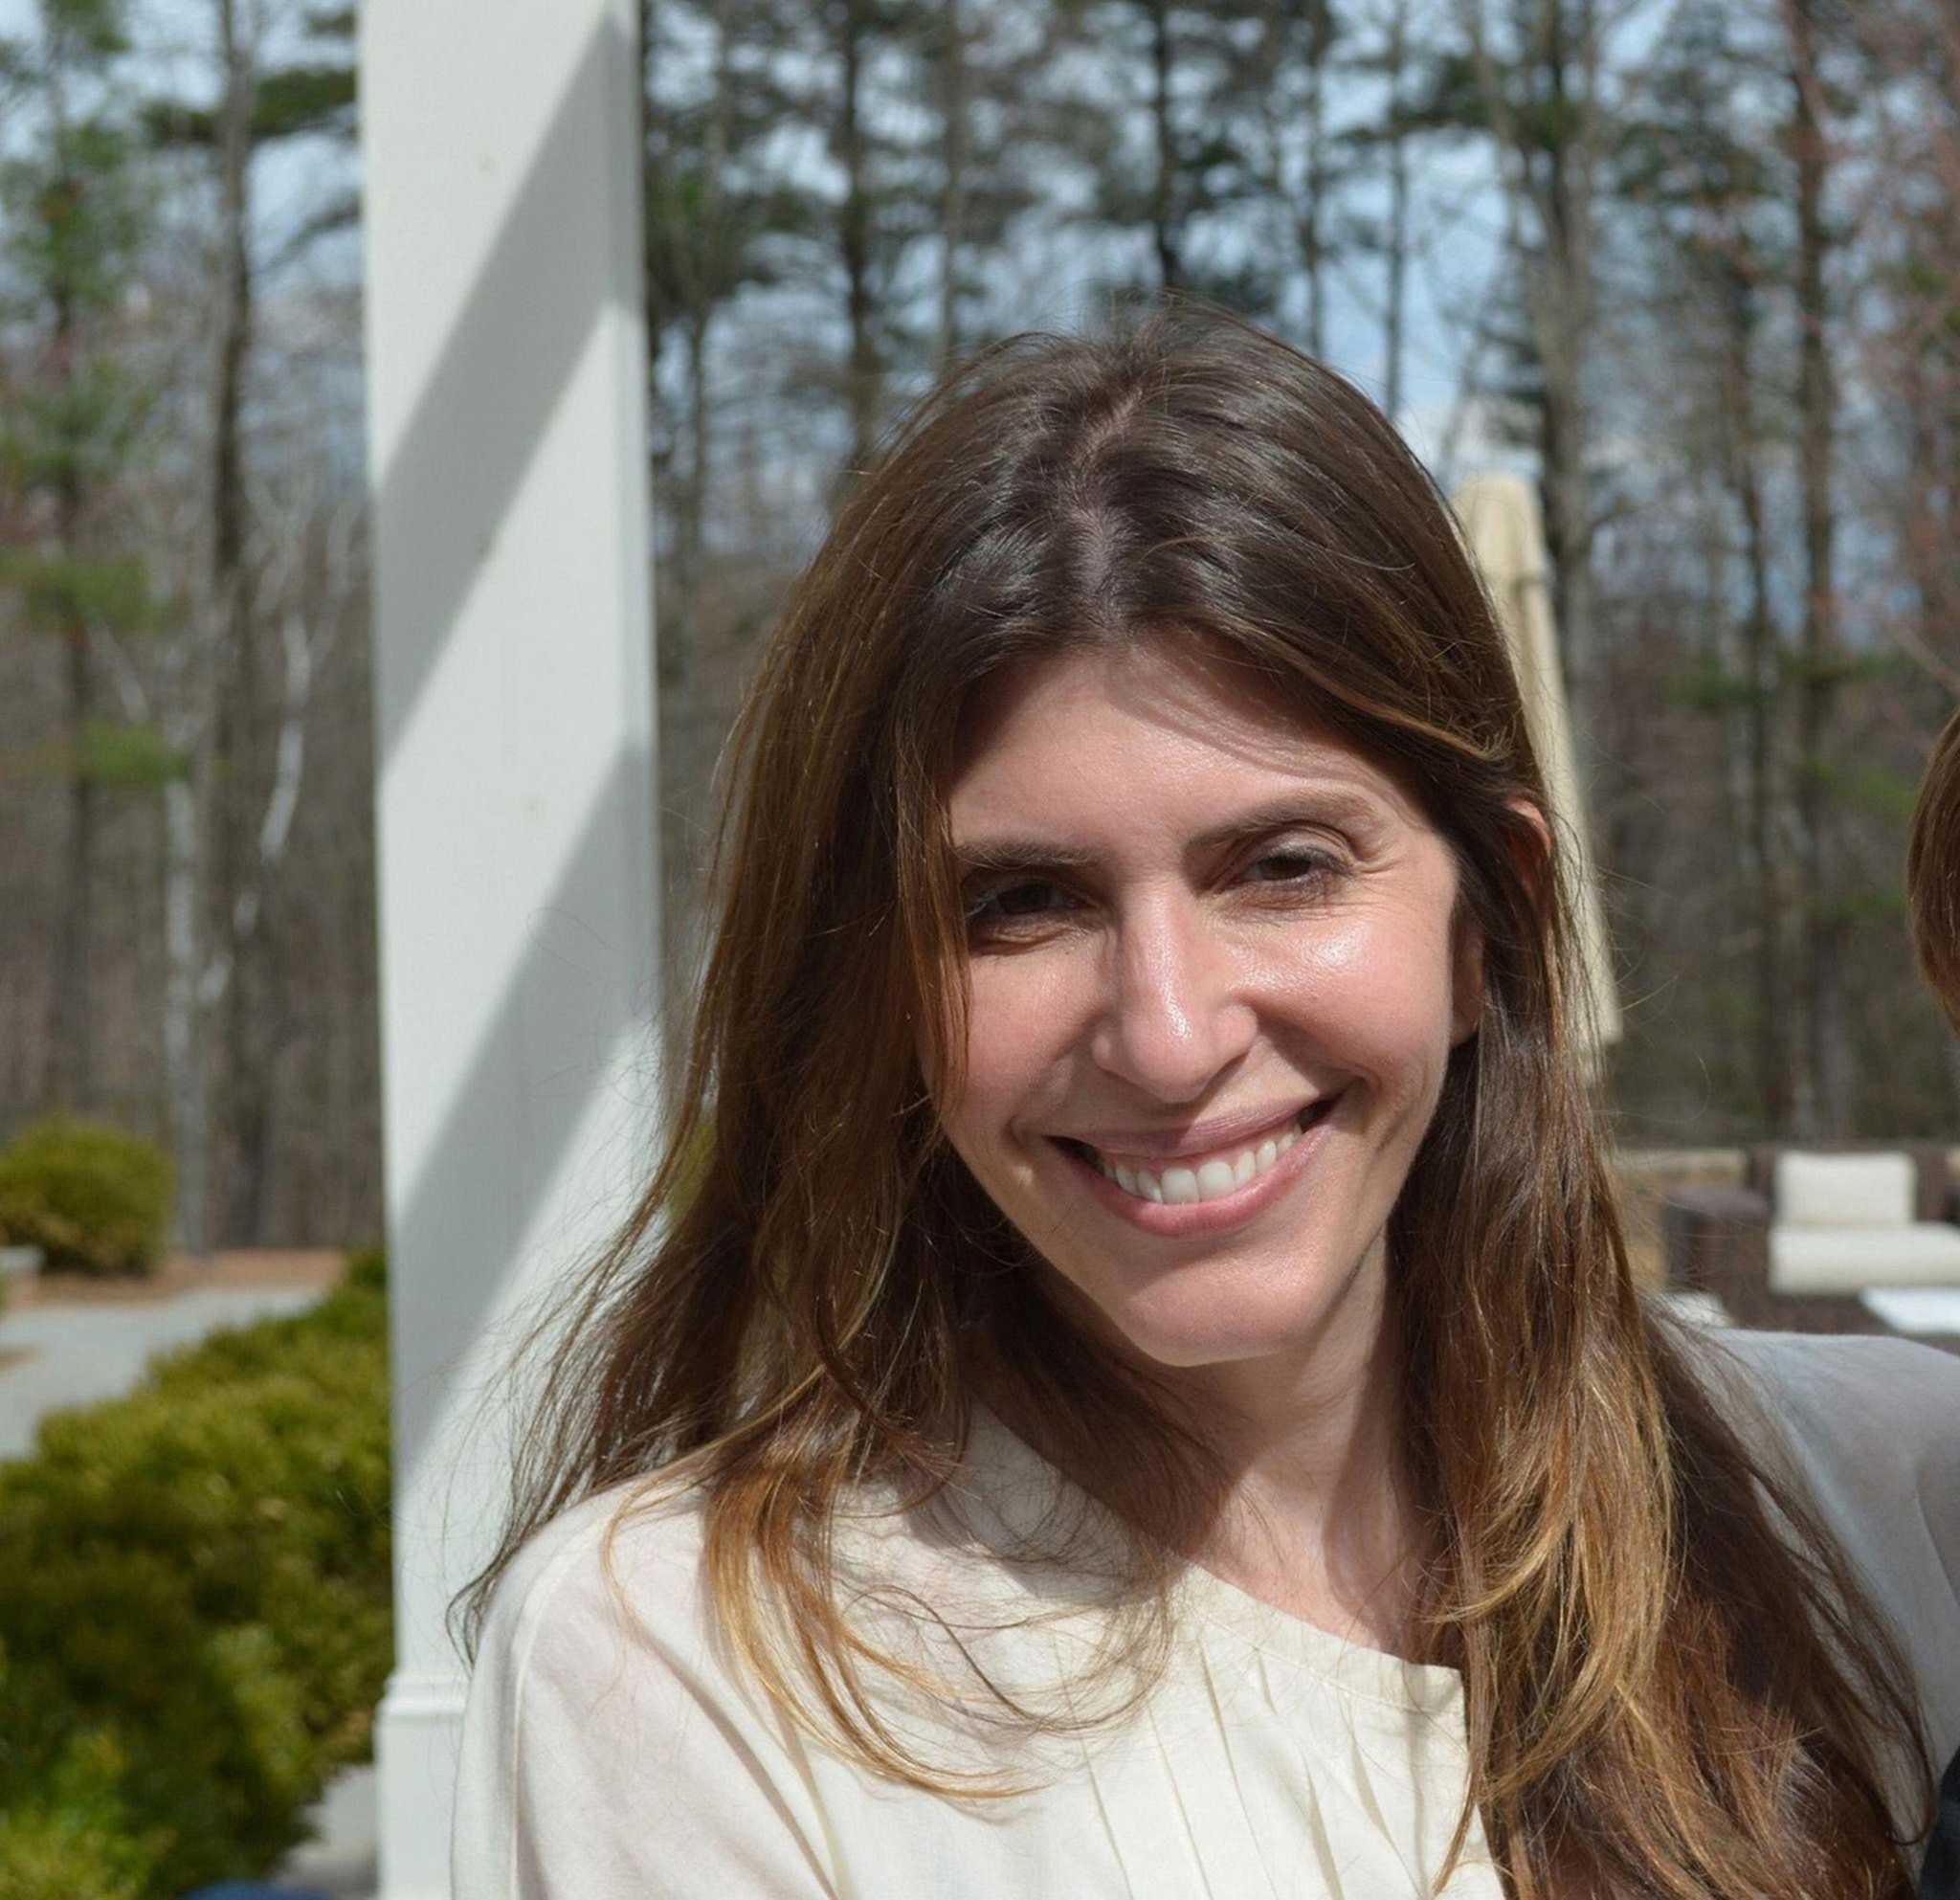 Jennifer Dulos disappearance to be focus of new 'Dateline NBC' episode